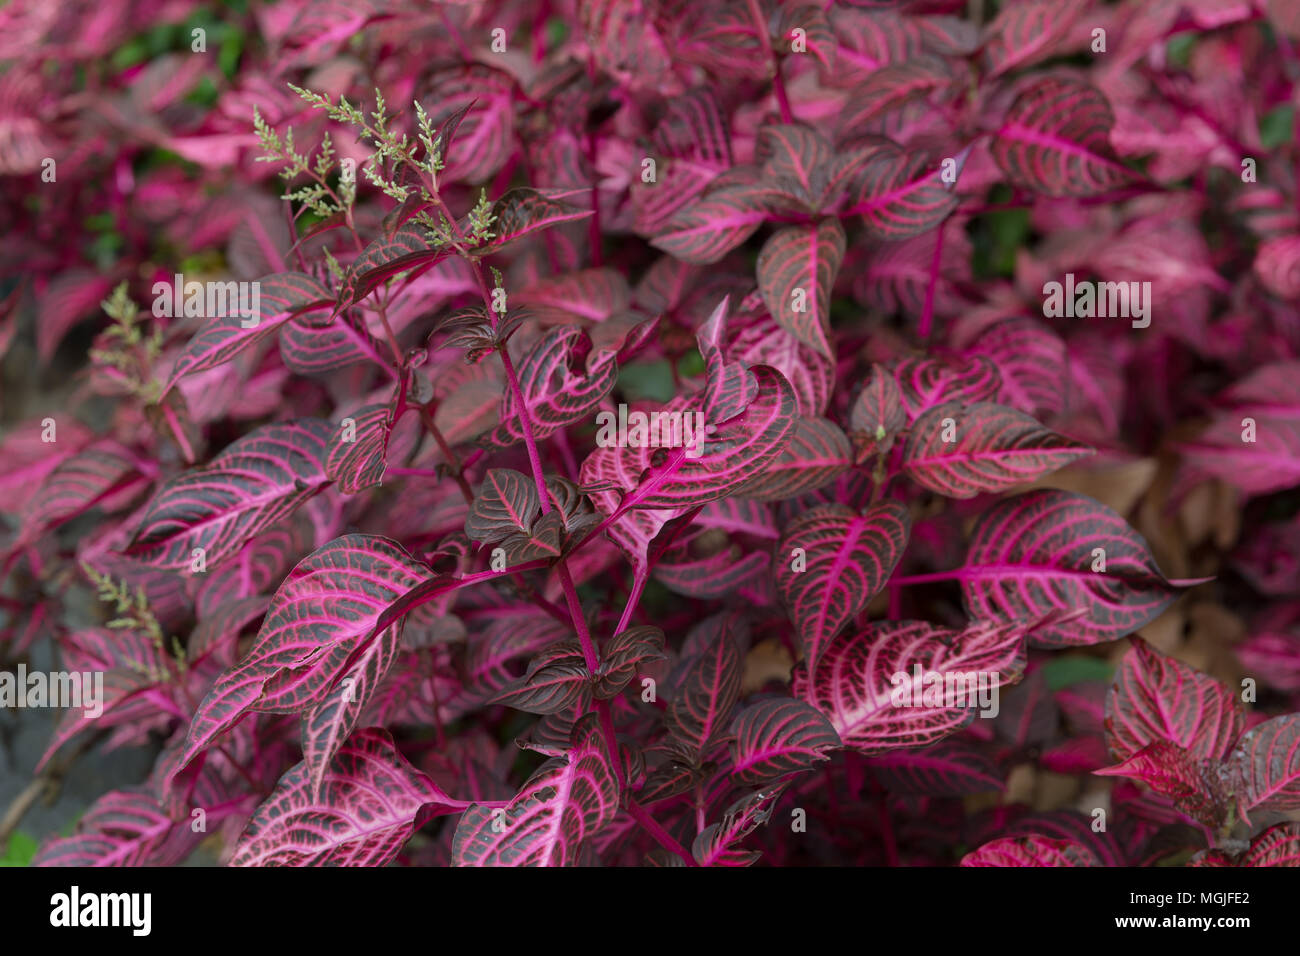 Purple and pink leaved tropical plant Stock Photo